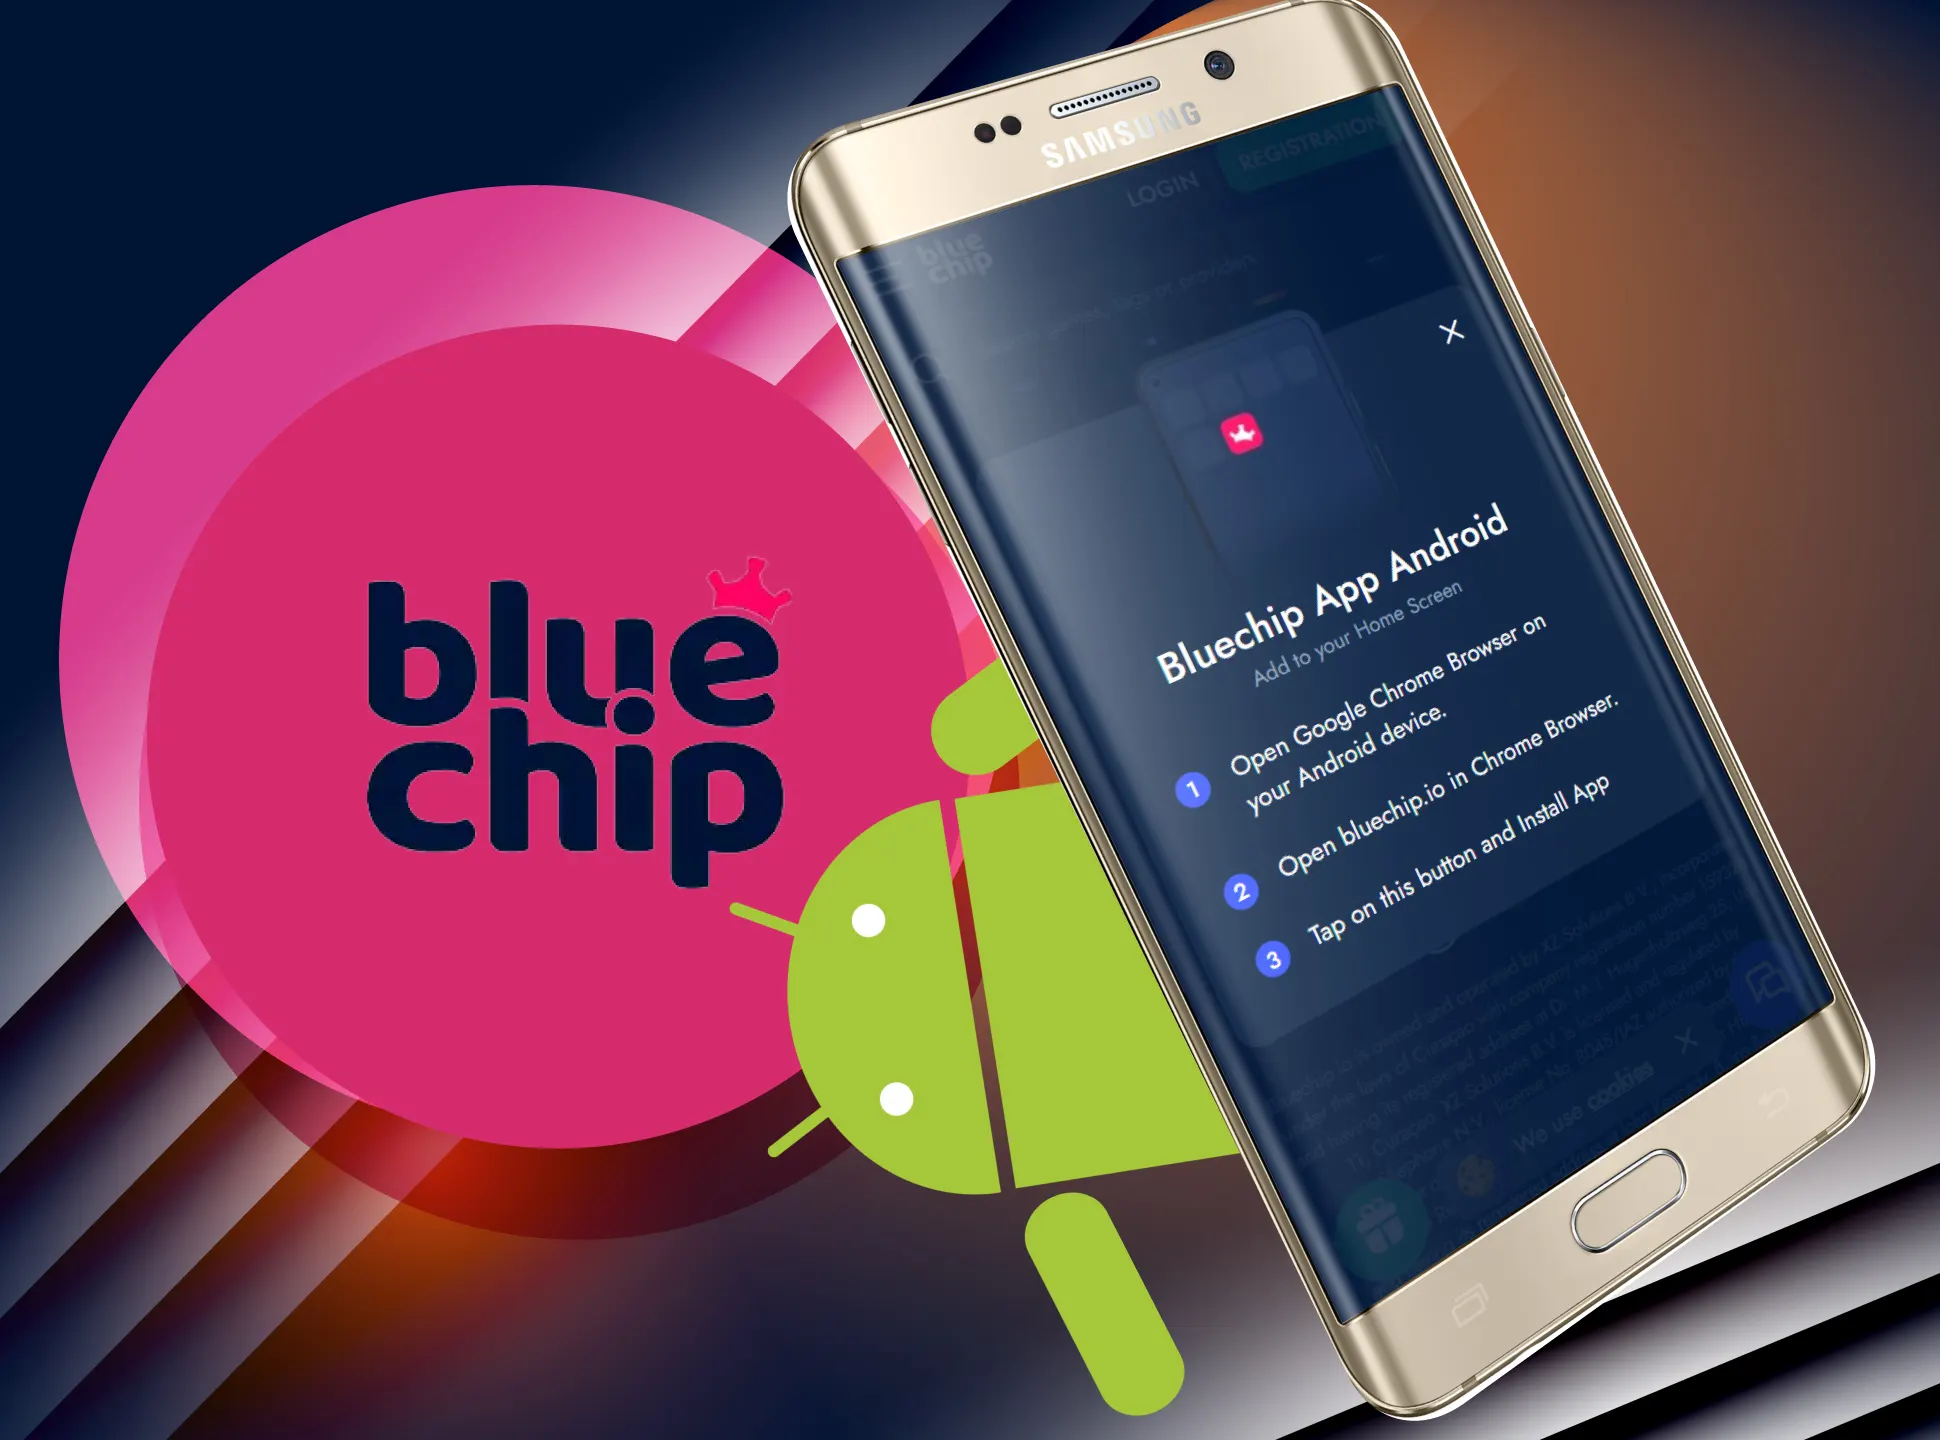 Download the Bluechip application on your Android device.